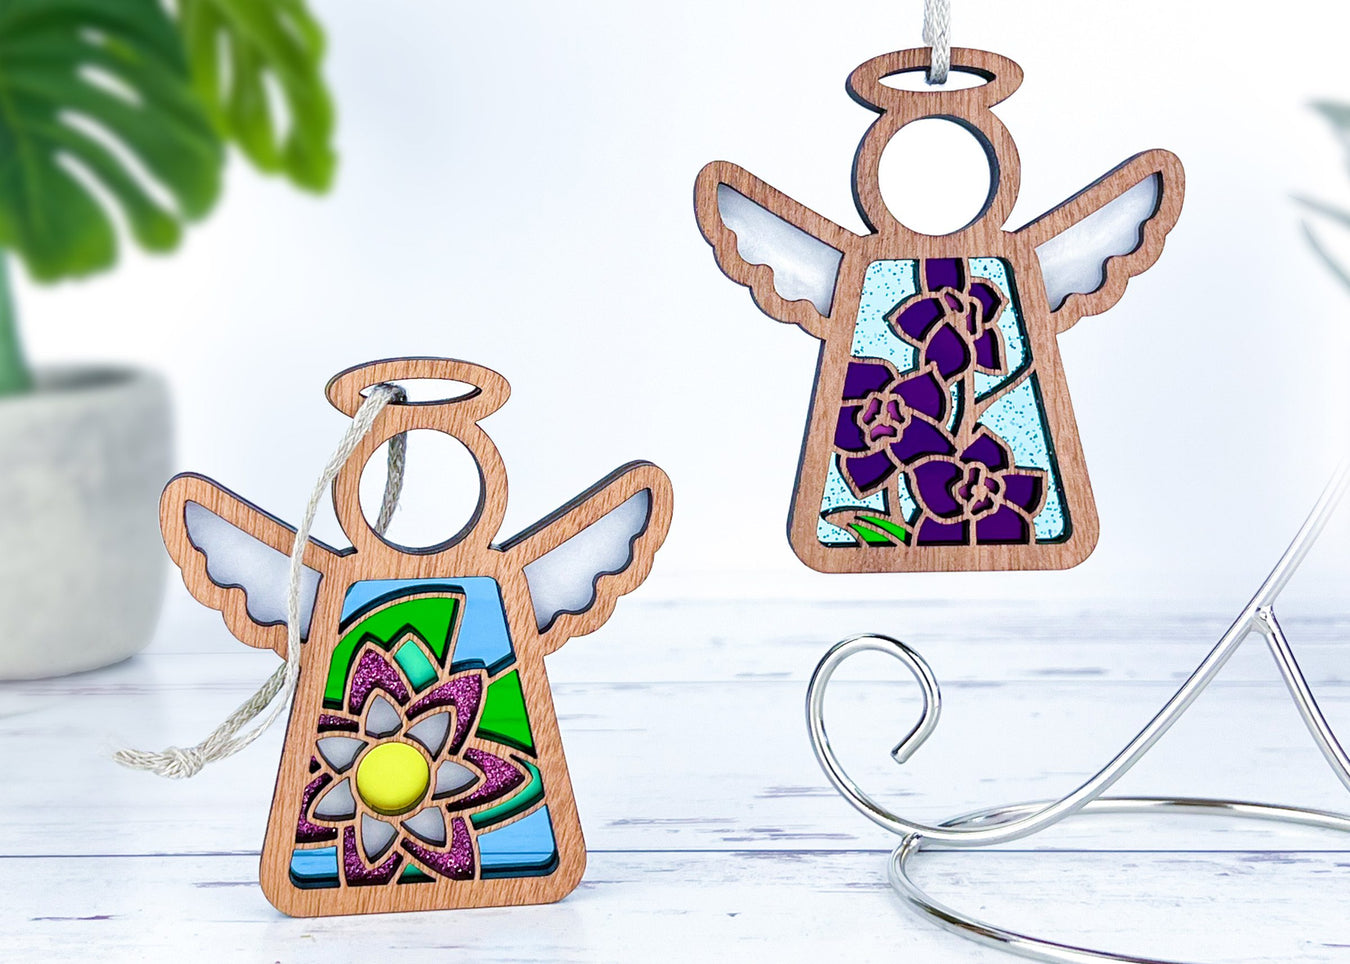 Angel ornaments featuring July birth month flowers, ideal birthday gift ideas for a wife, best friend or special women, showcasing vibrant water lily and larkspur birth flowers in a stained glass inspired style.